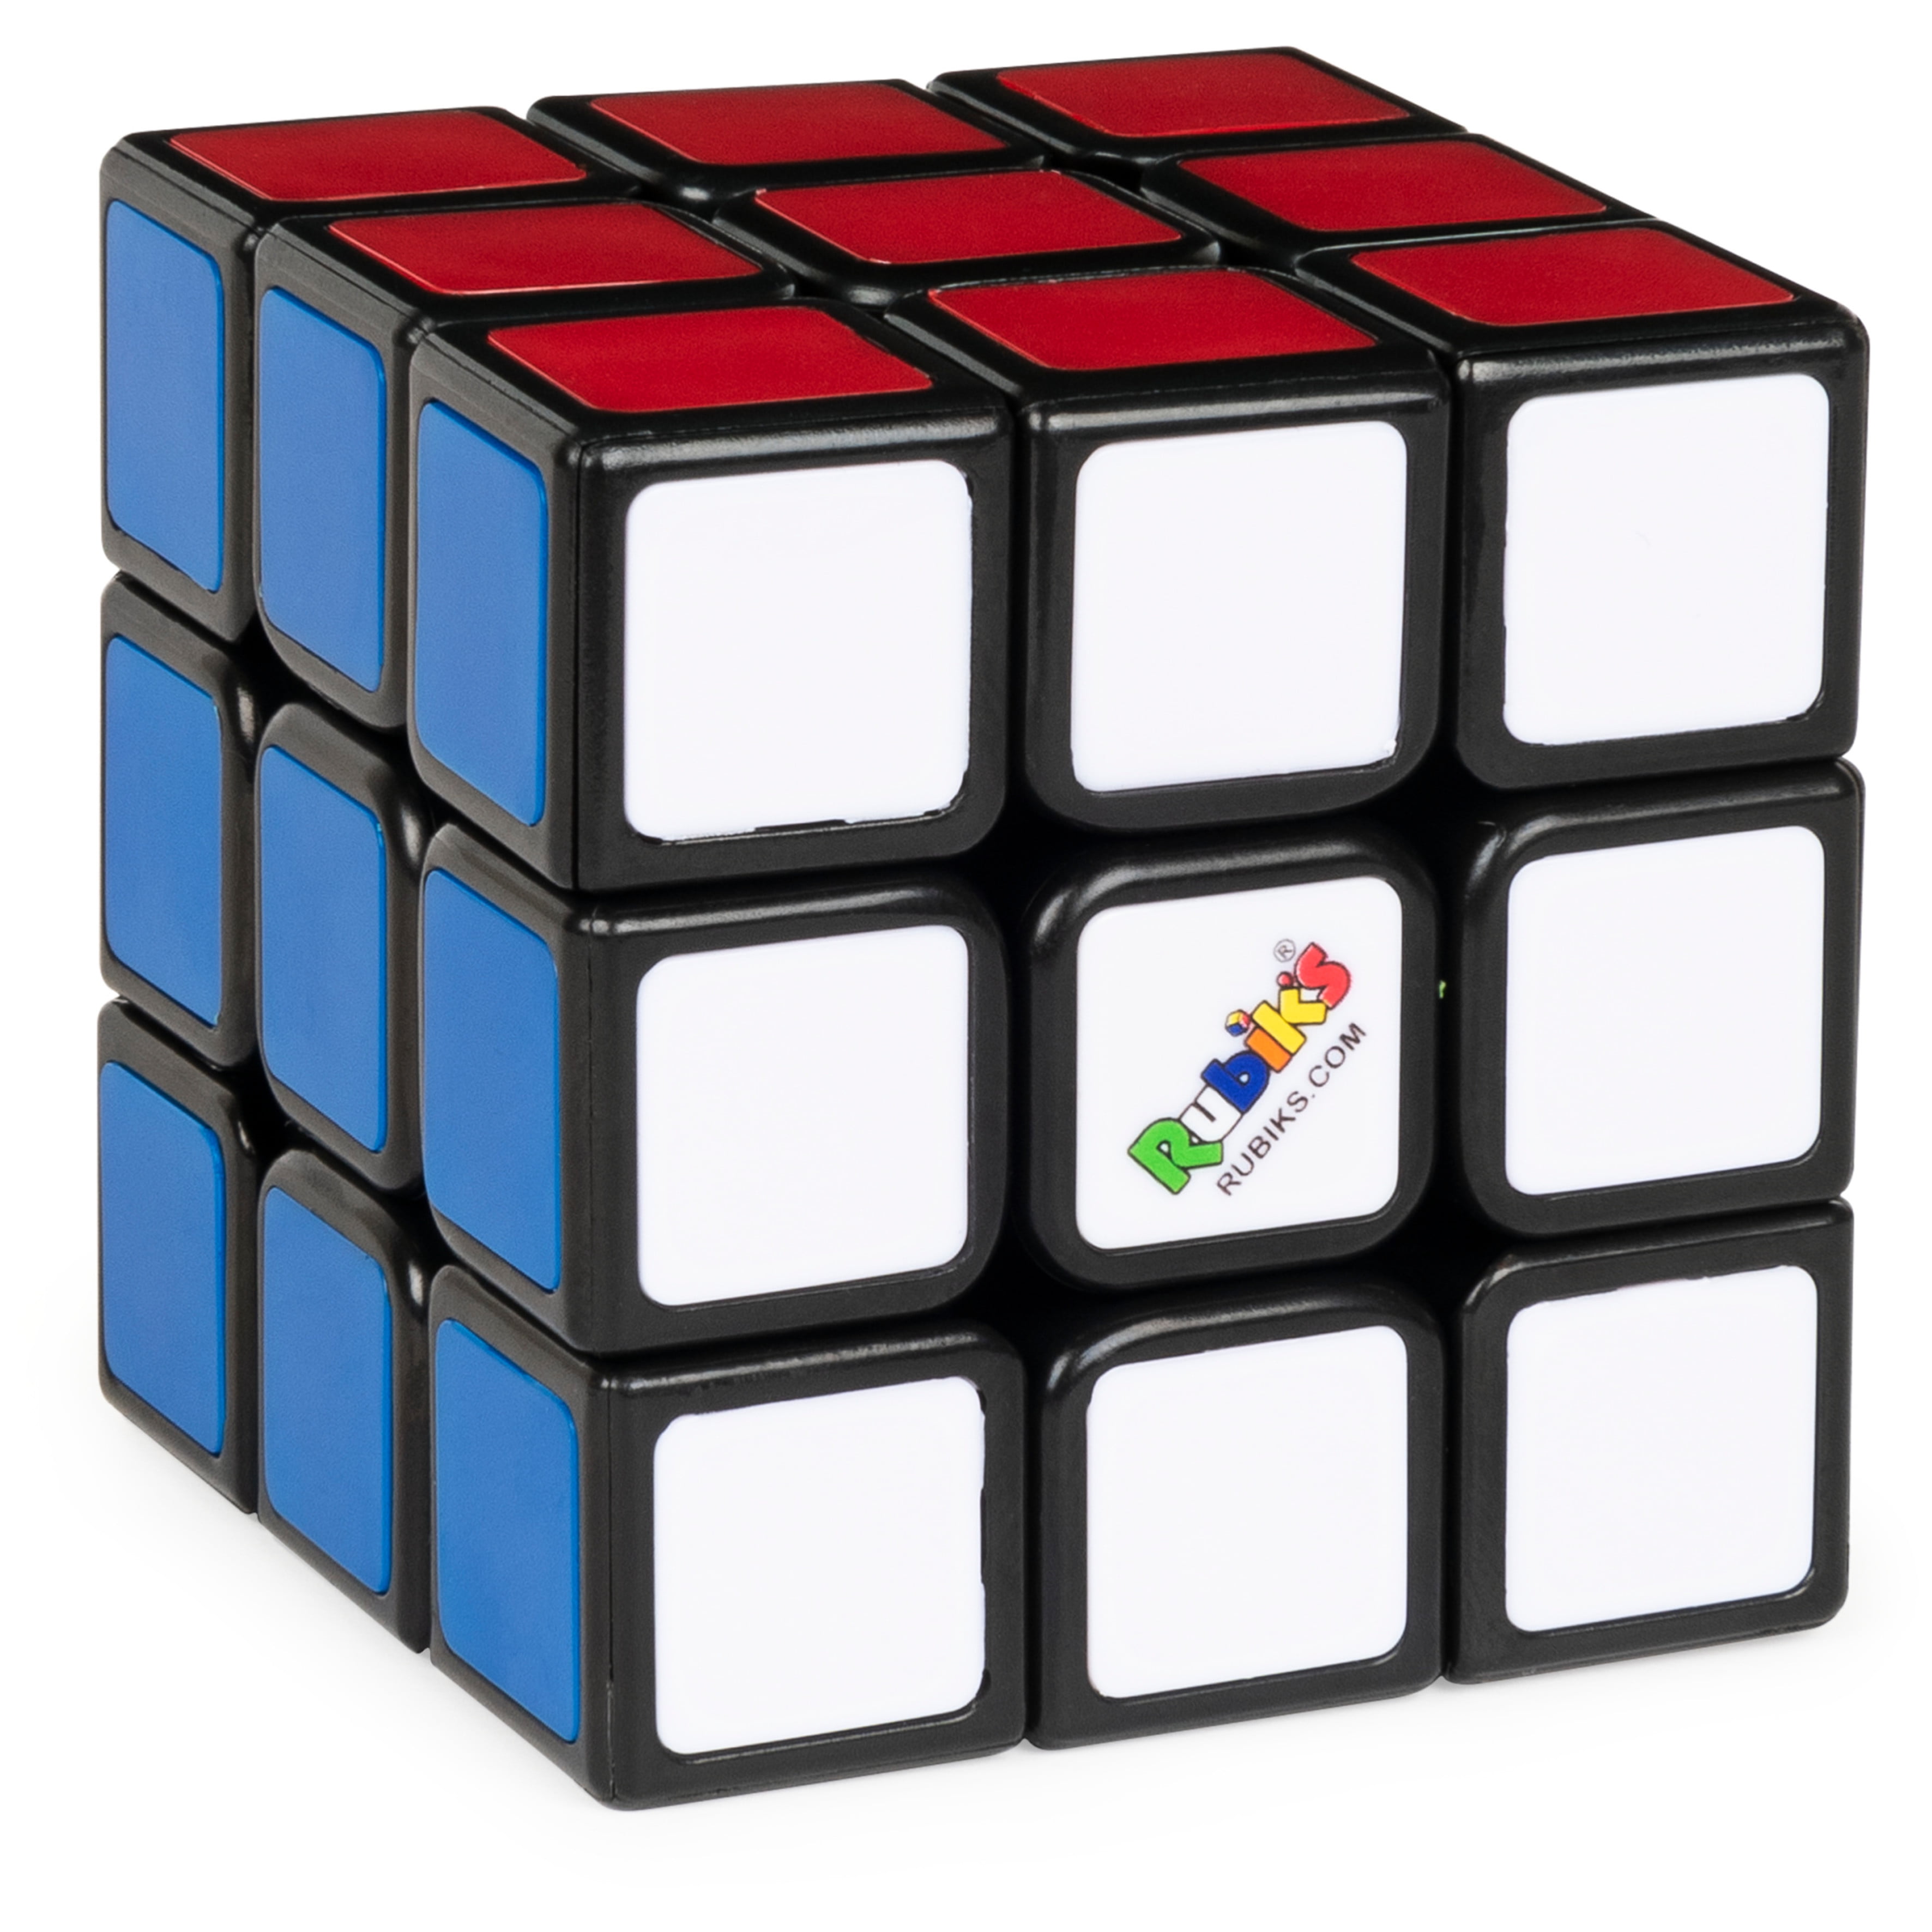 New Rubiks Cube 3x3 Original Brain Teaser Puzzle Strategy w/ Stand Hasbro A9312 